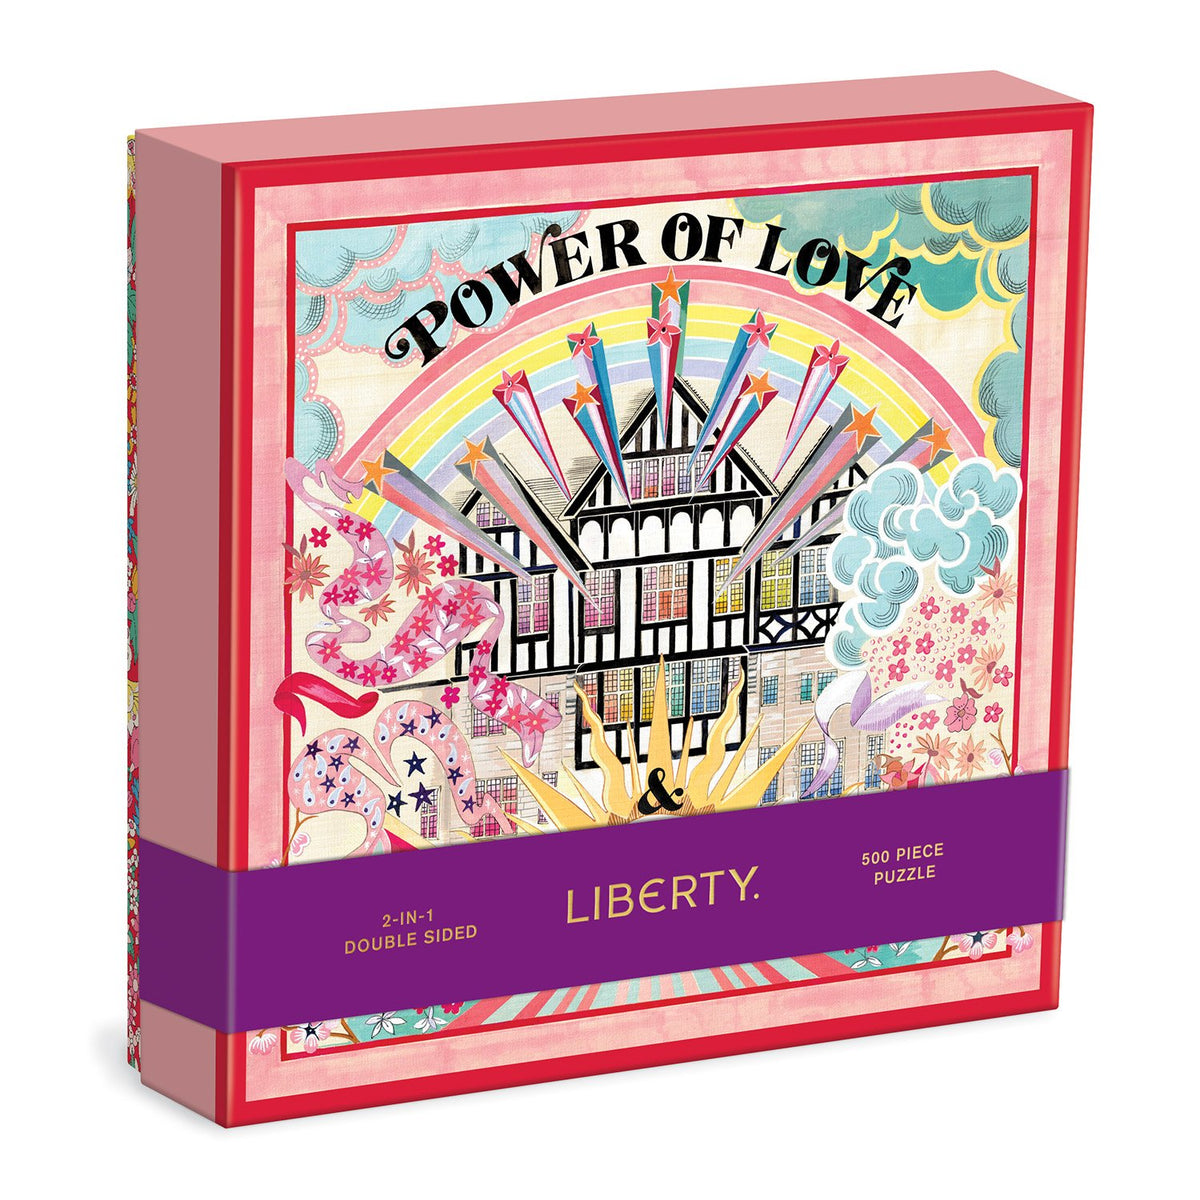 Liberty Power of Love 500 Piece Double Sided Jigsaw Puzzle with Shaped Pieces 500 Piece Puzzles Liberty London 